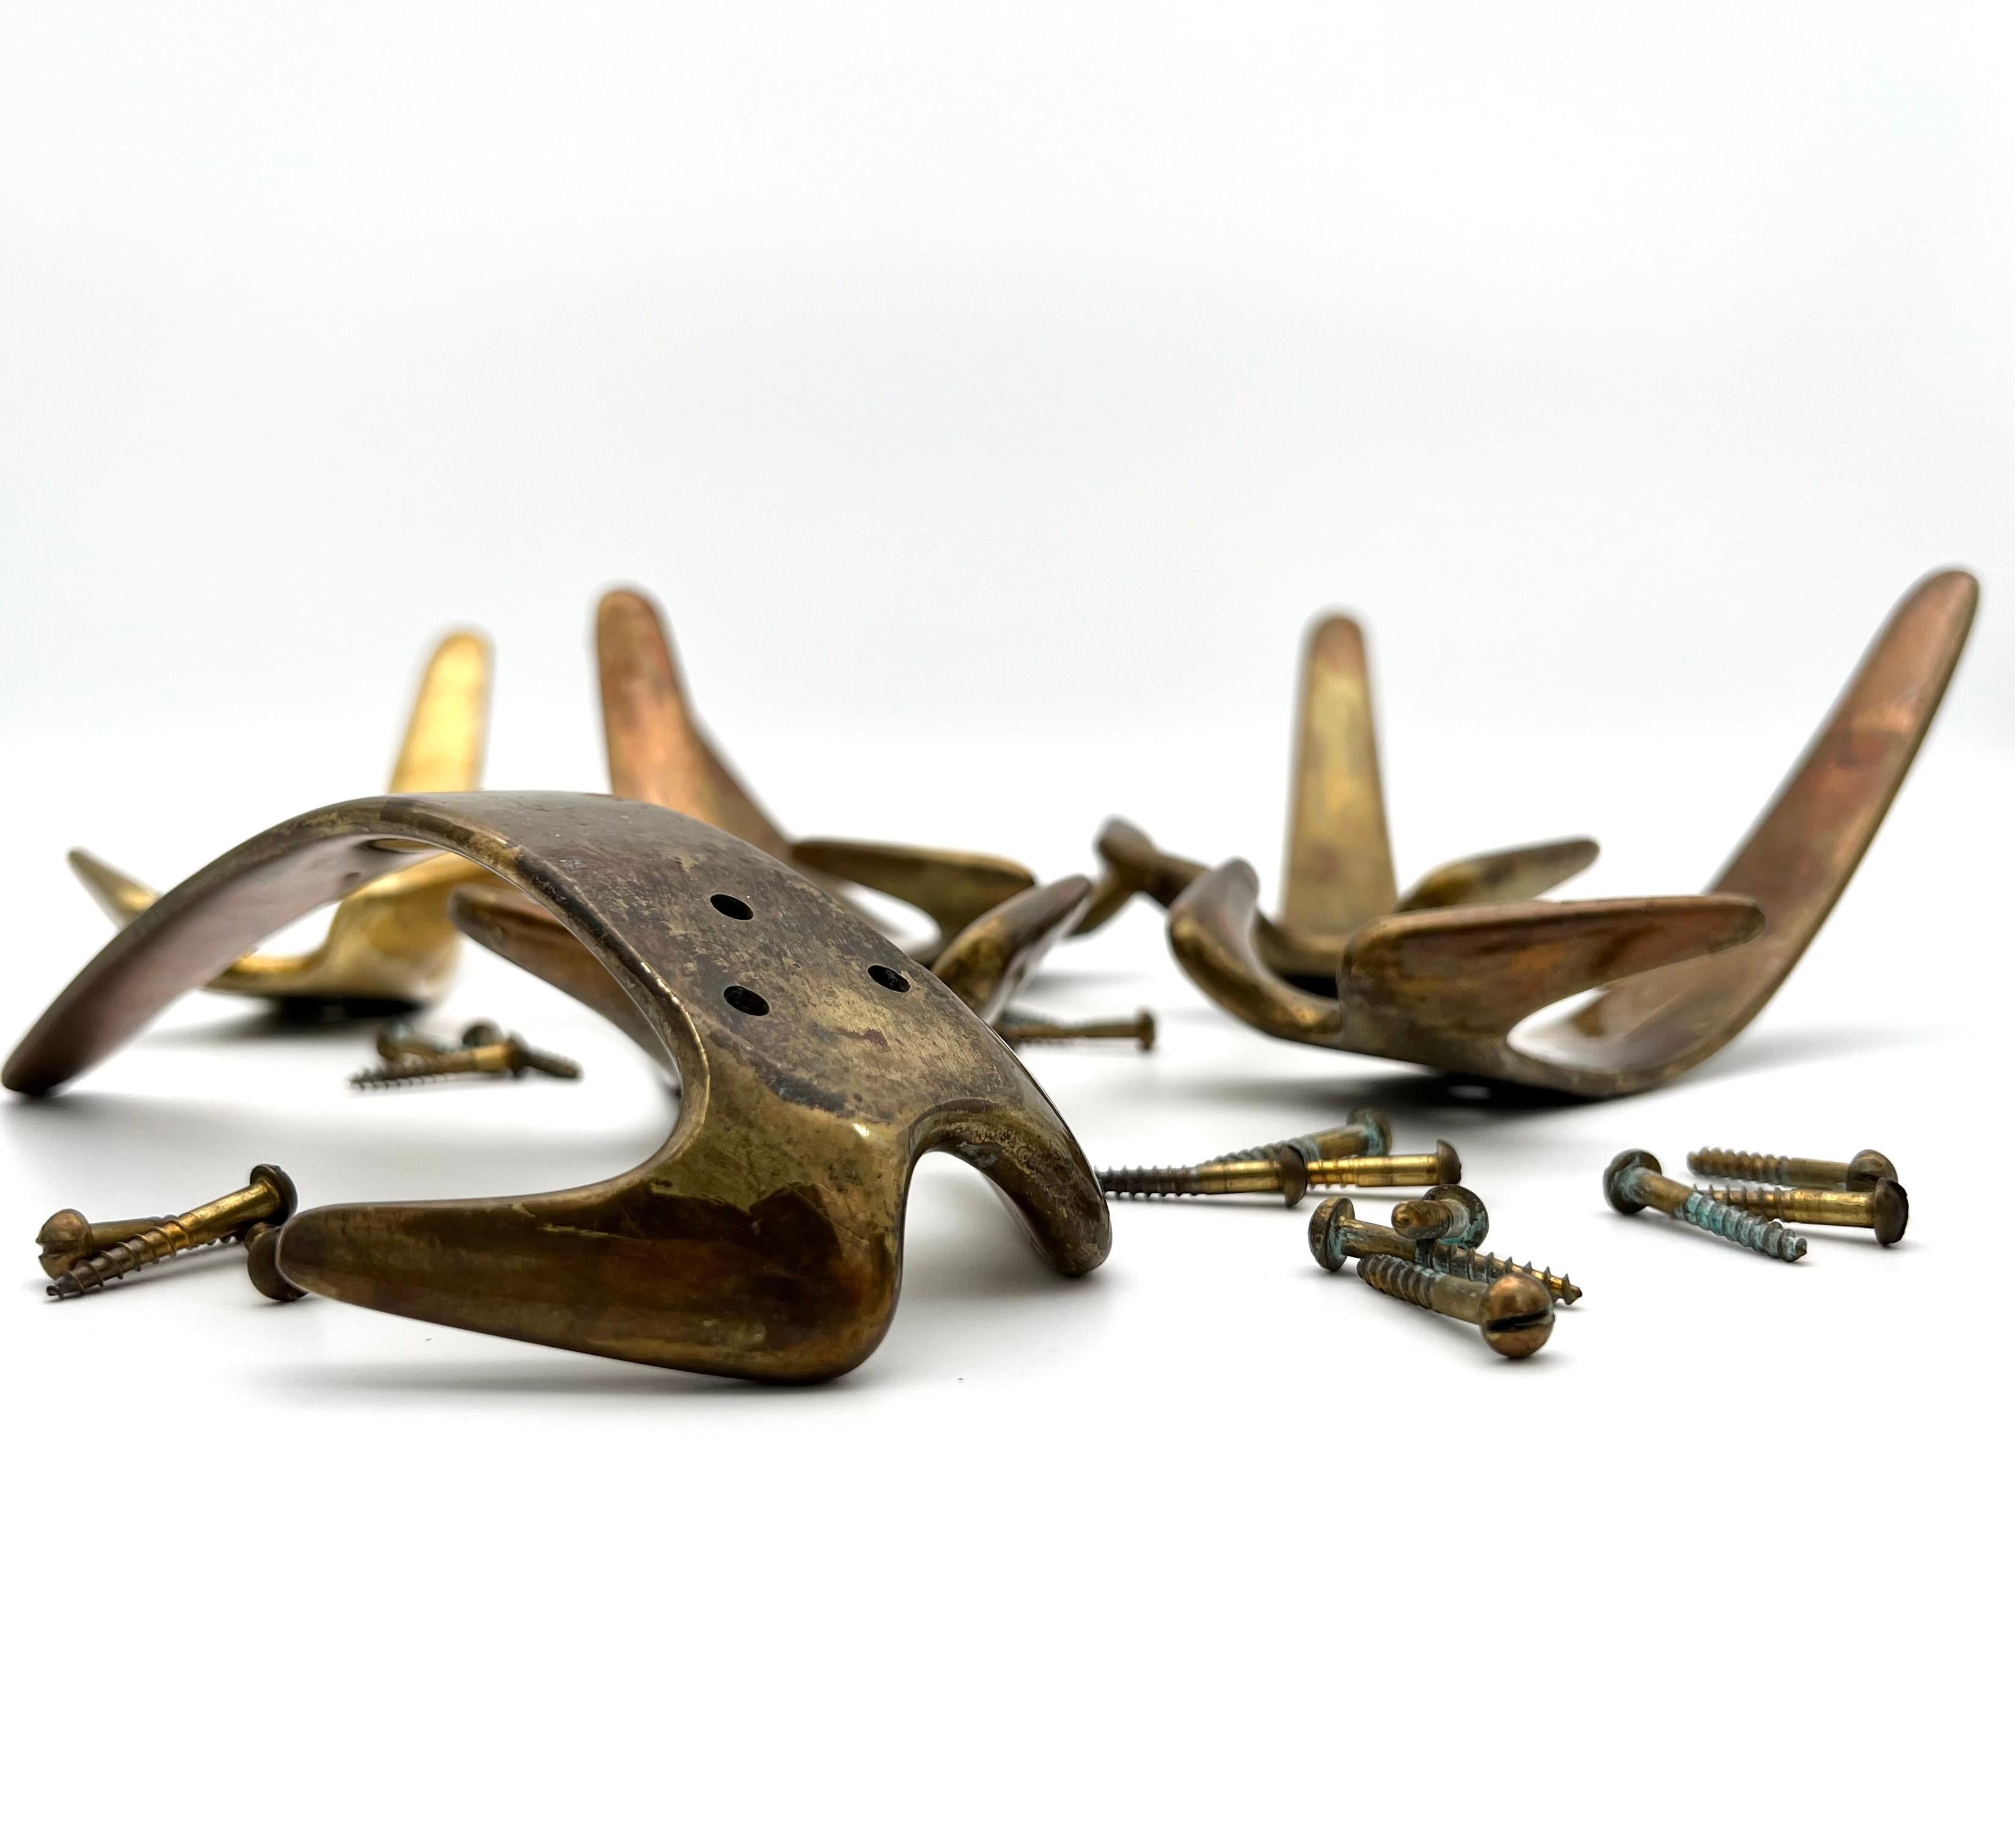 Set of 6 Original 50s Wardrobe hooks solid brass created by Carl Auböck.
Bought directly from an Viennese apartment, furnished in the year 1958. 
Original brass screws are included ! Nice patina, left as found.